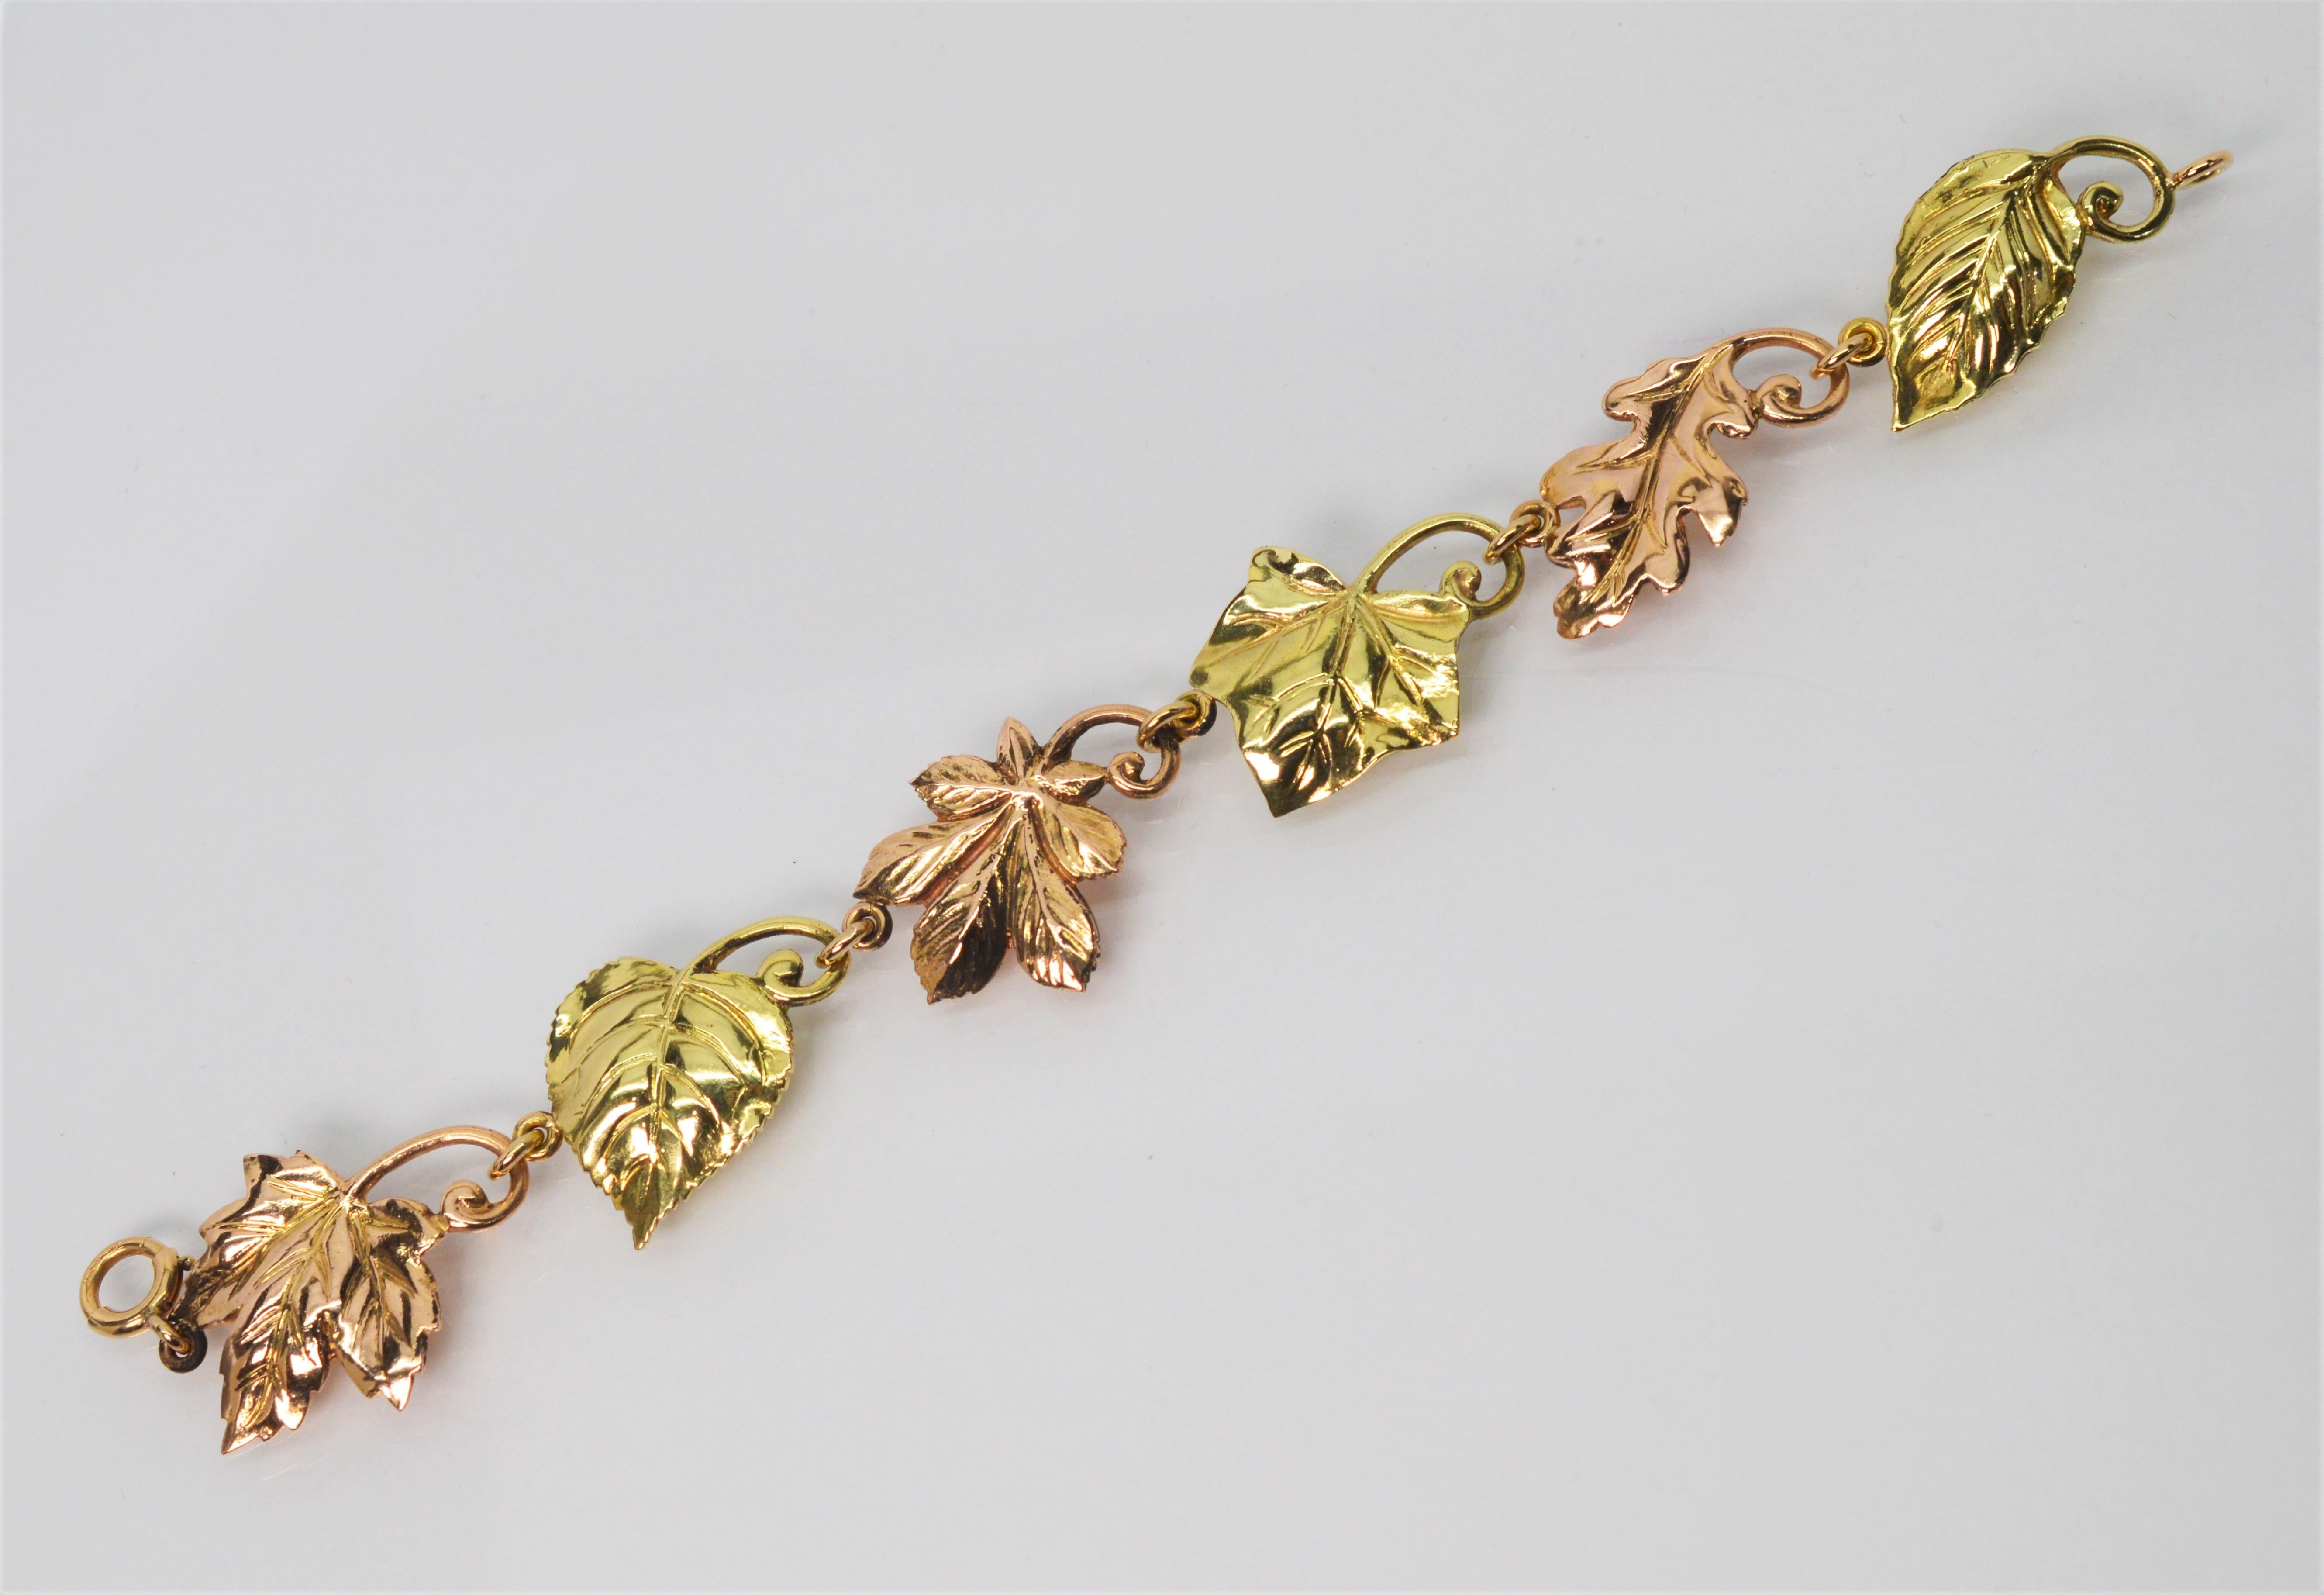 Beautifully crafted by Tiffany & Co. circa 1950's , this bracelet displays a potpourri of fourteen 14k karat rose and yellow gold leaves artfully linked to 
create this 7 1/2 inch bracelet. The alternating gold hues and different leaf varieties give